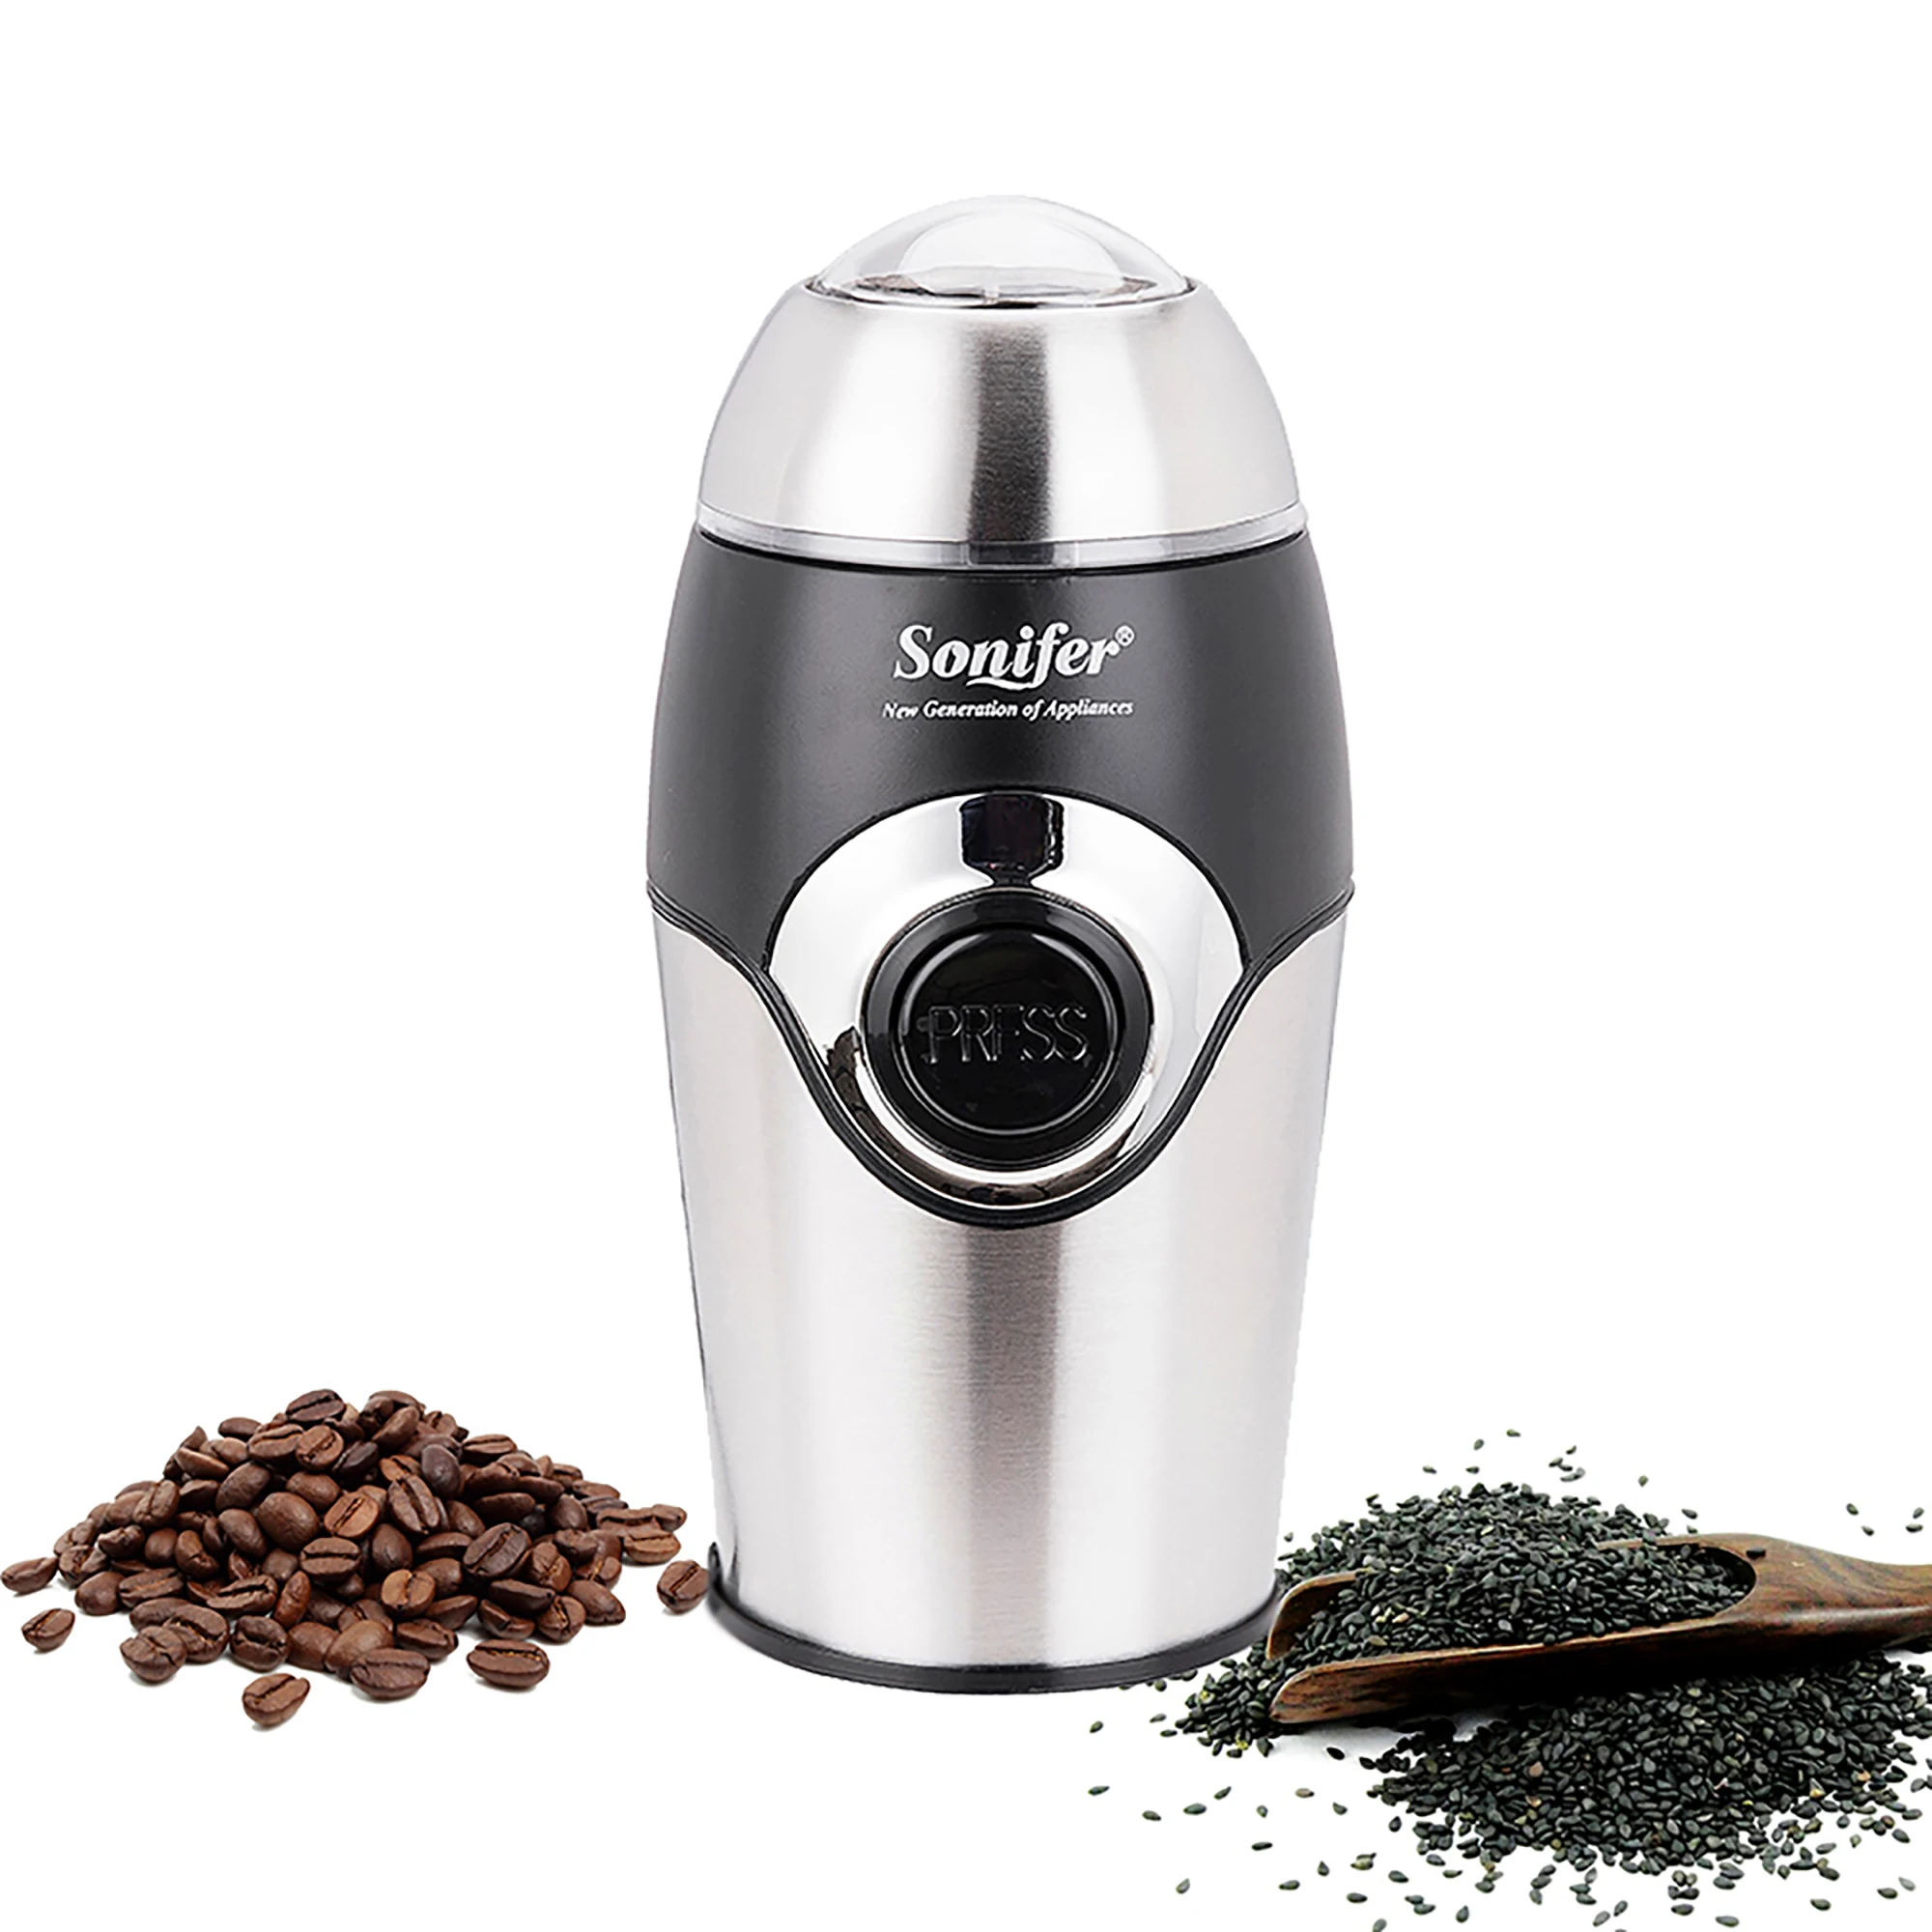 

200W Mini Electric Coffee Grinder Maker Kitchen Salt Pepper Grinder Spices Nut Seed Coffee Beans Mill Herbs Nuts 220V Sonifer